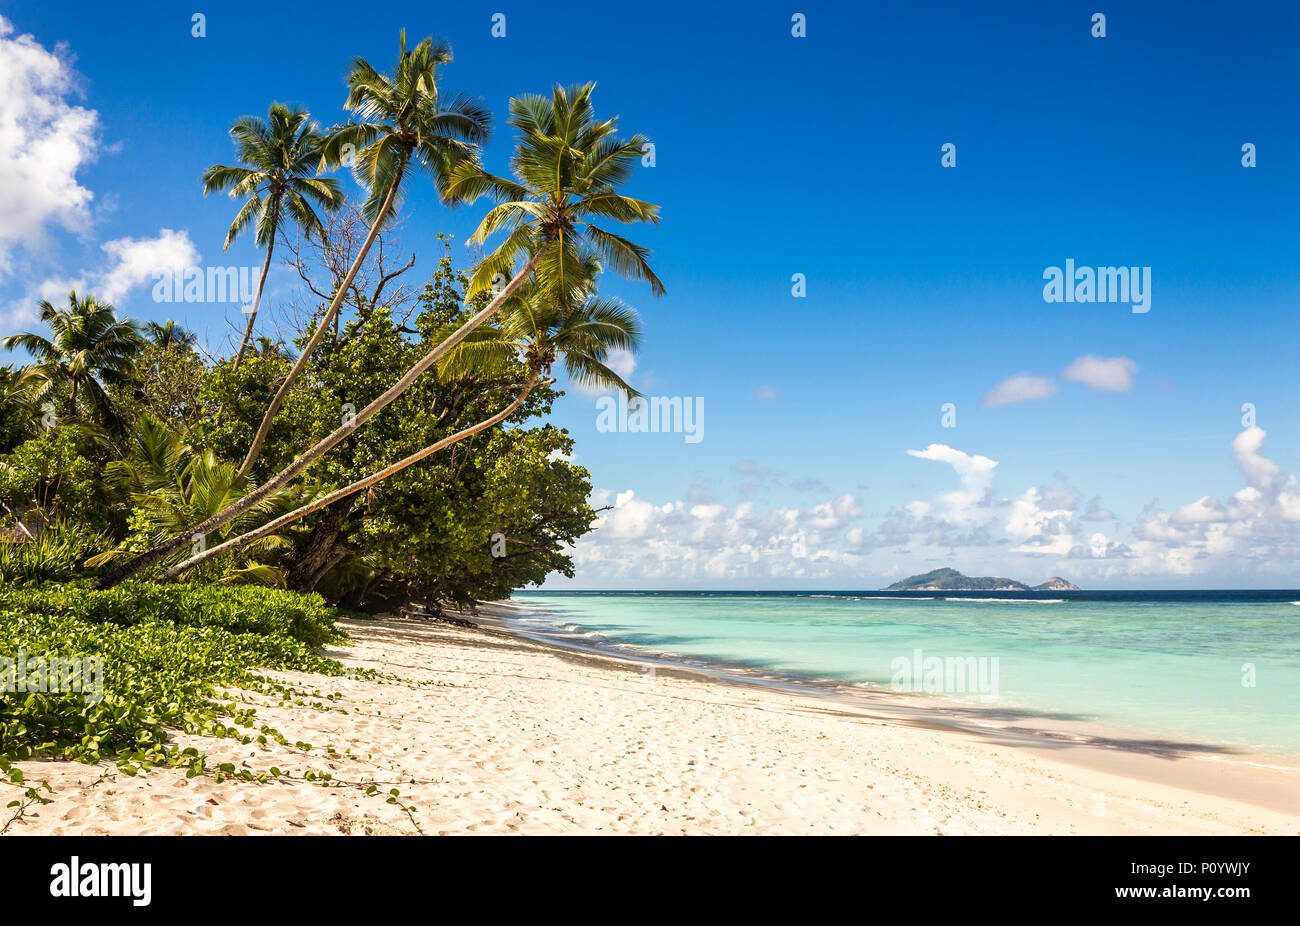 Idyllic scenery of sandy beach and turquoise Indian Ocean in the Seychelles Stock Photo